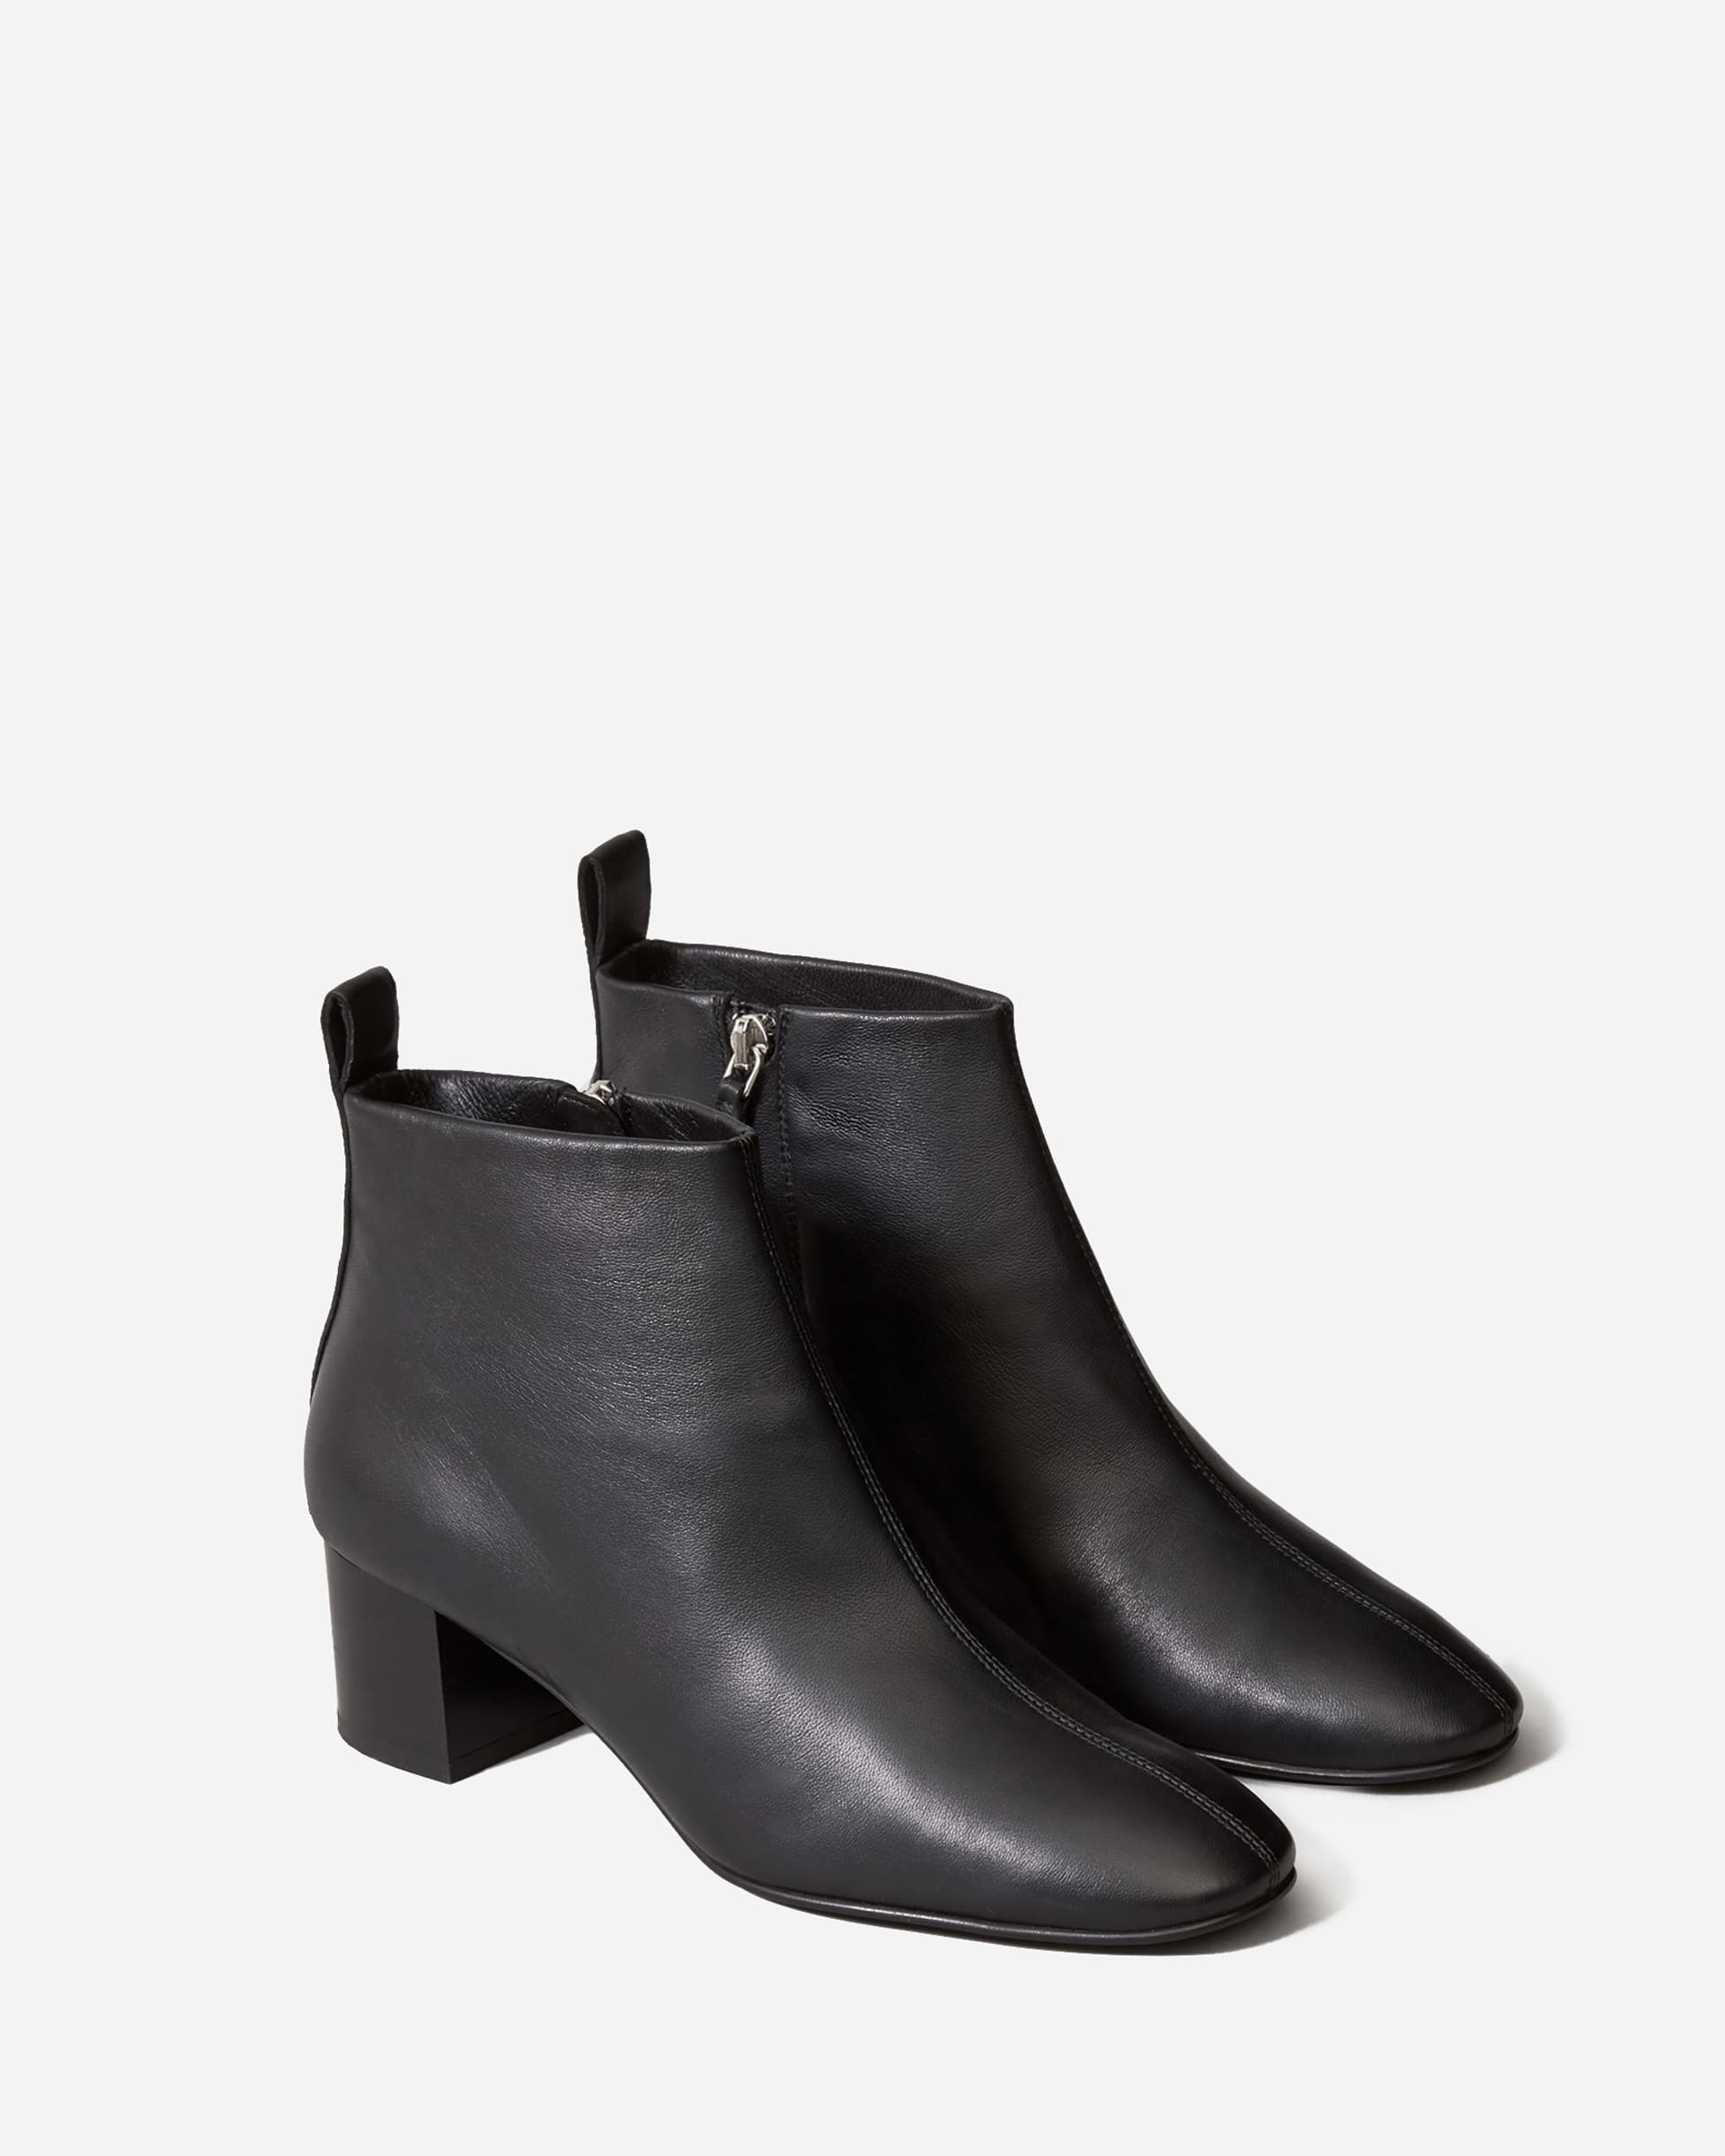 The Day Ankle Boot Black – Everlane